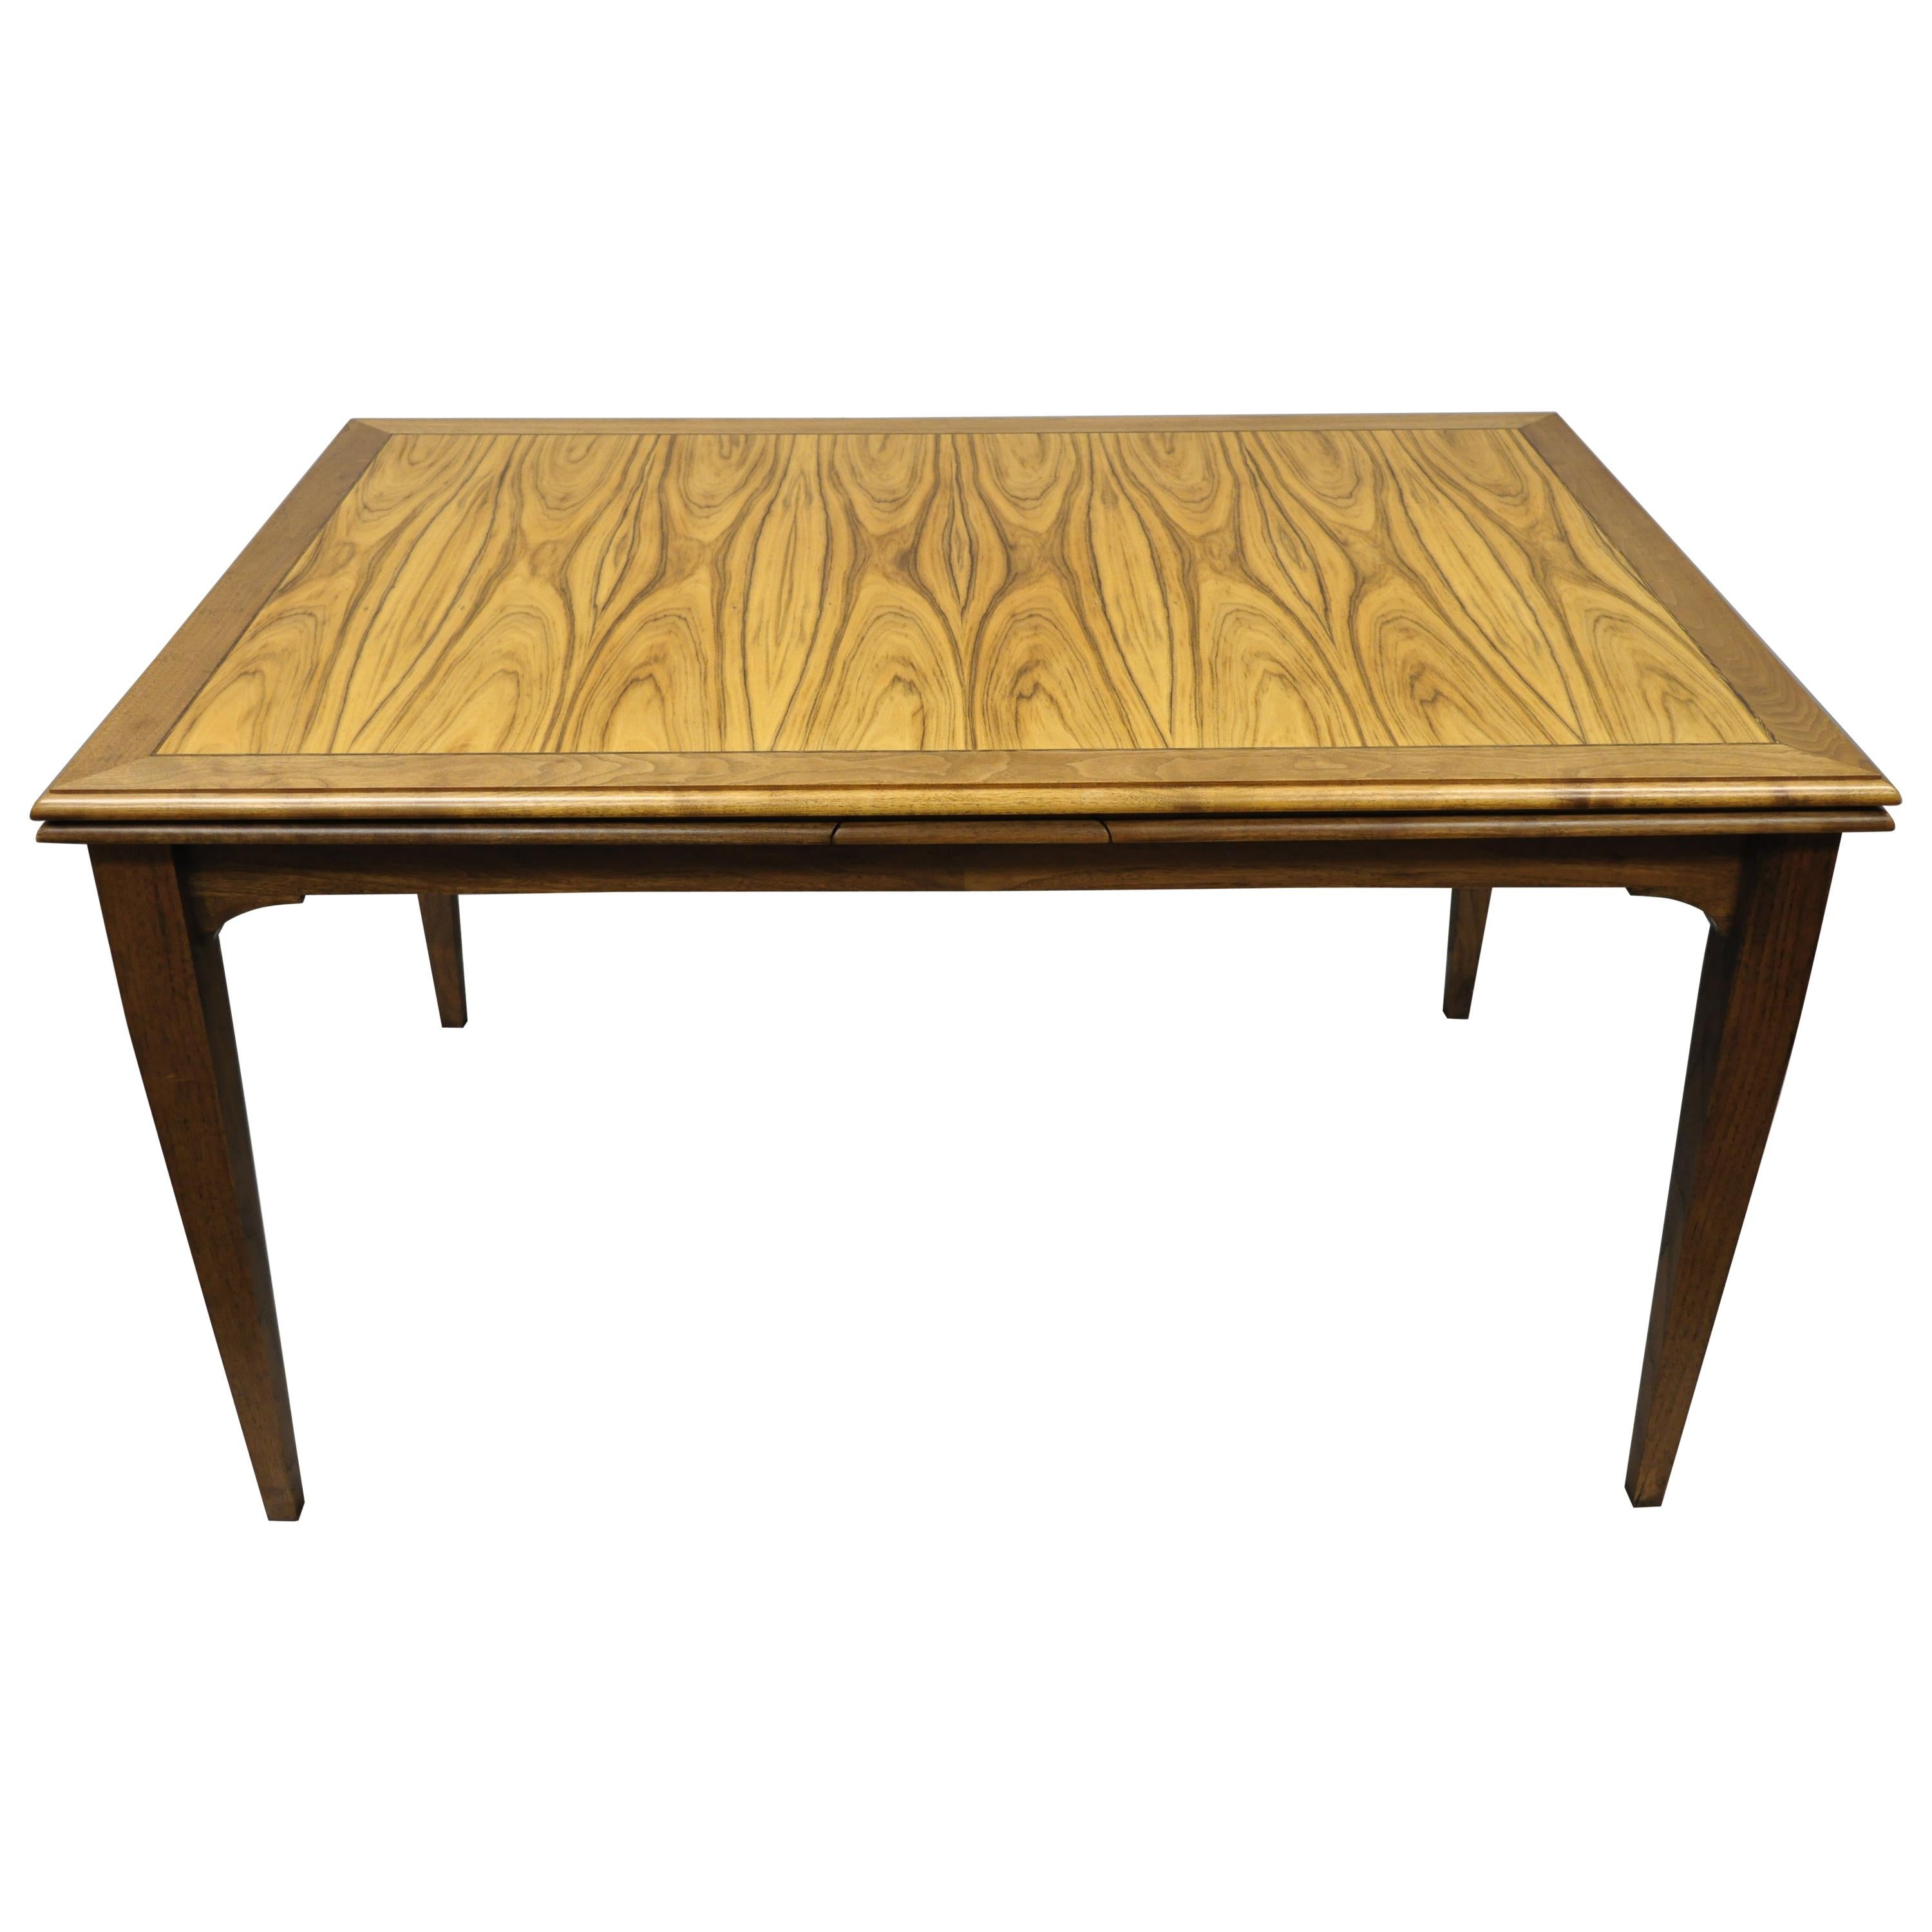 Rosewood Danish Mid-Century Modern Style Extension Dining Table by Paul Downs